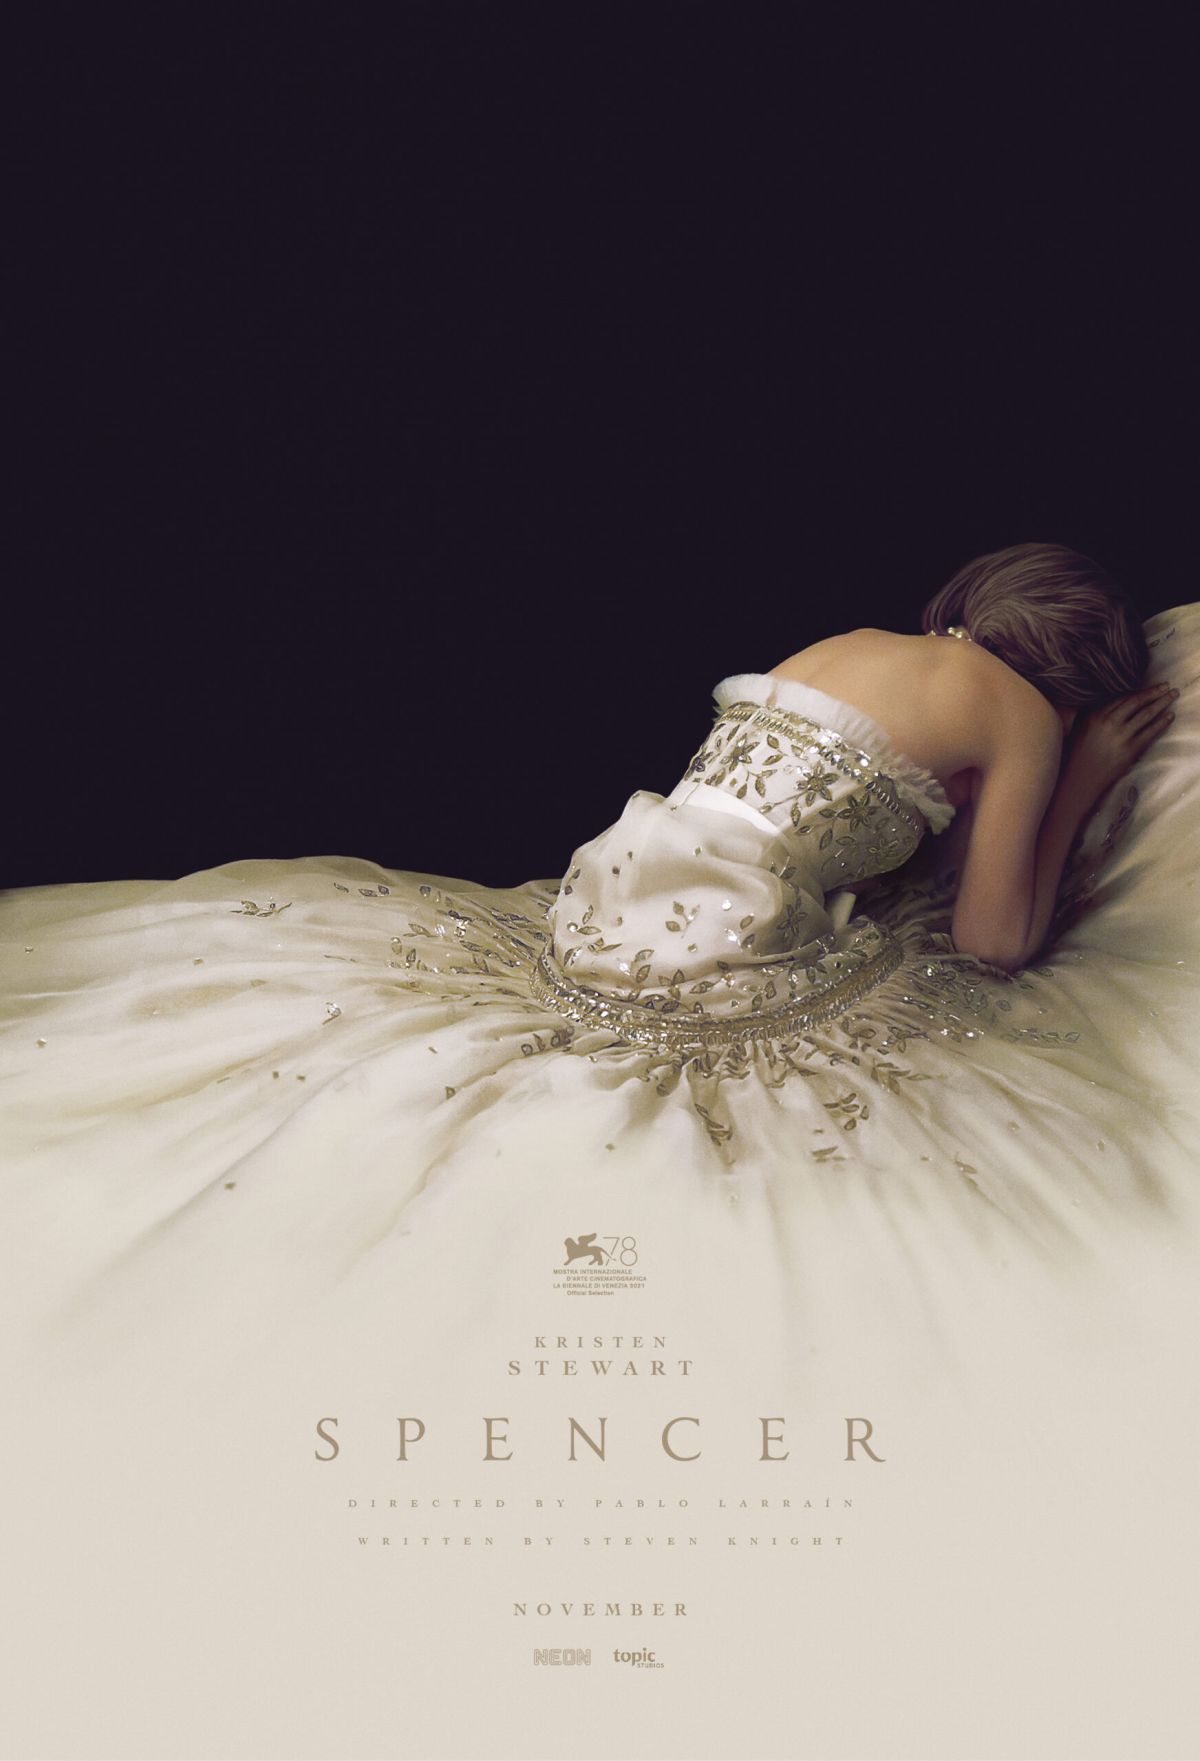 Spencer Review: A spoon-fed affront to intellect